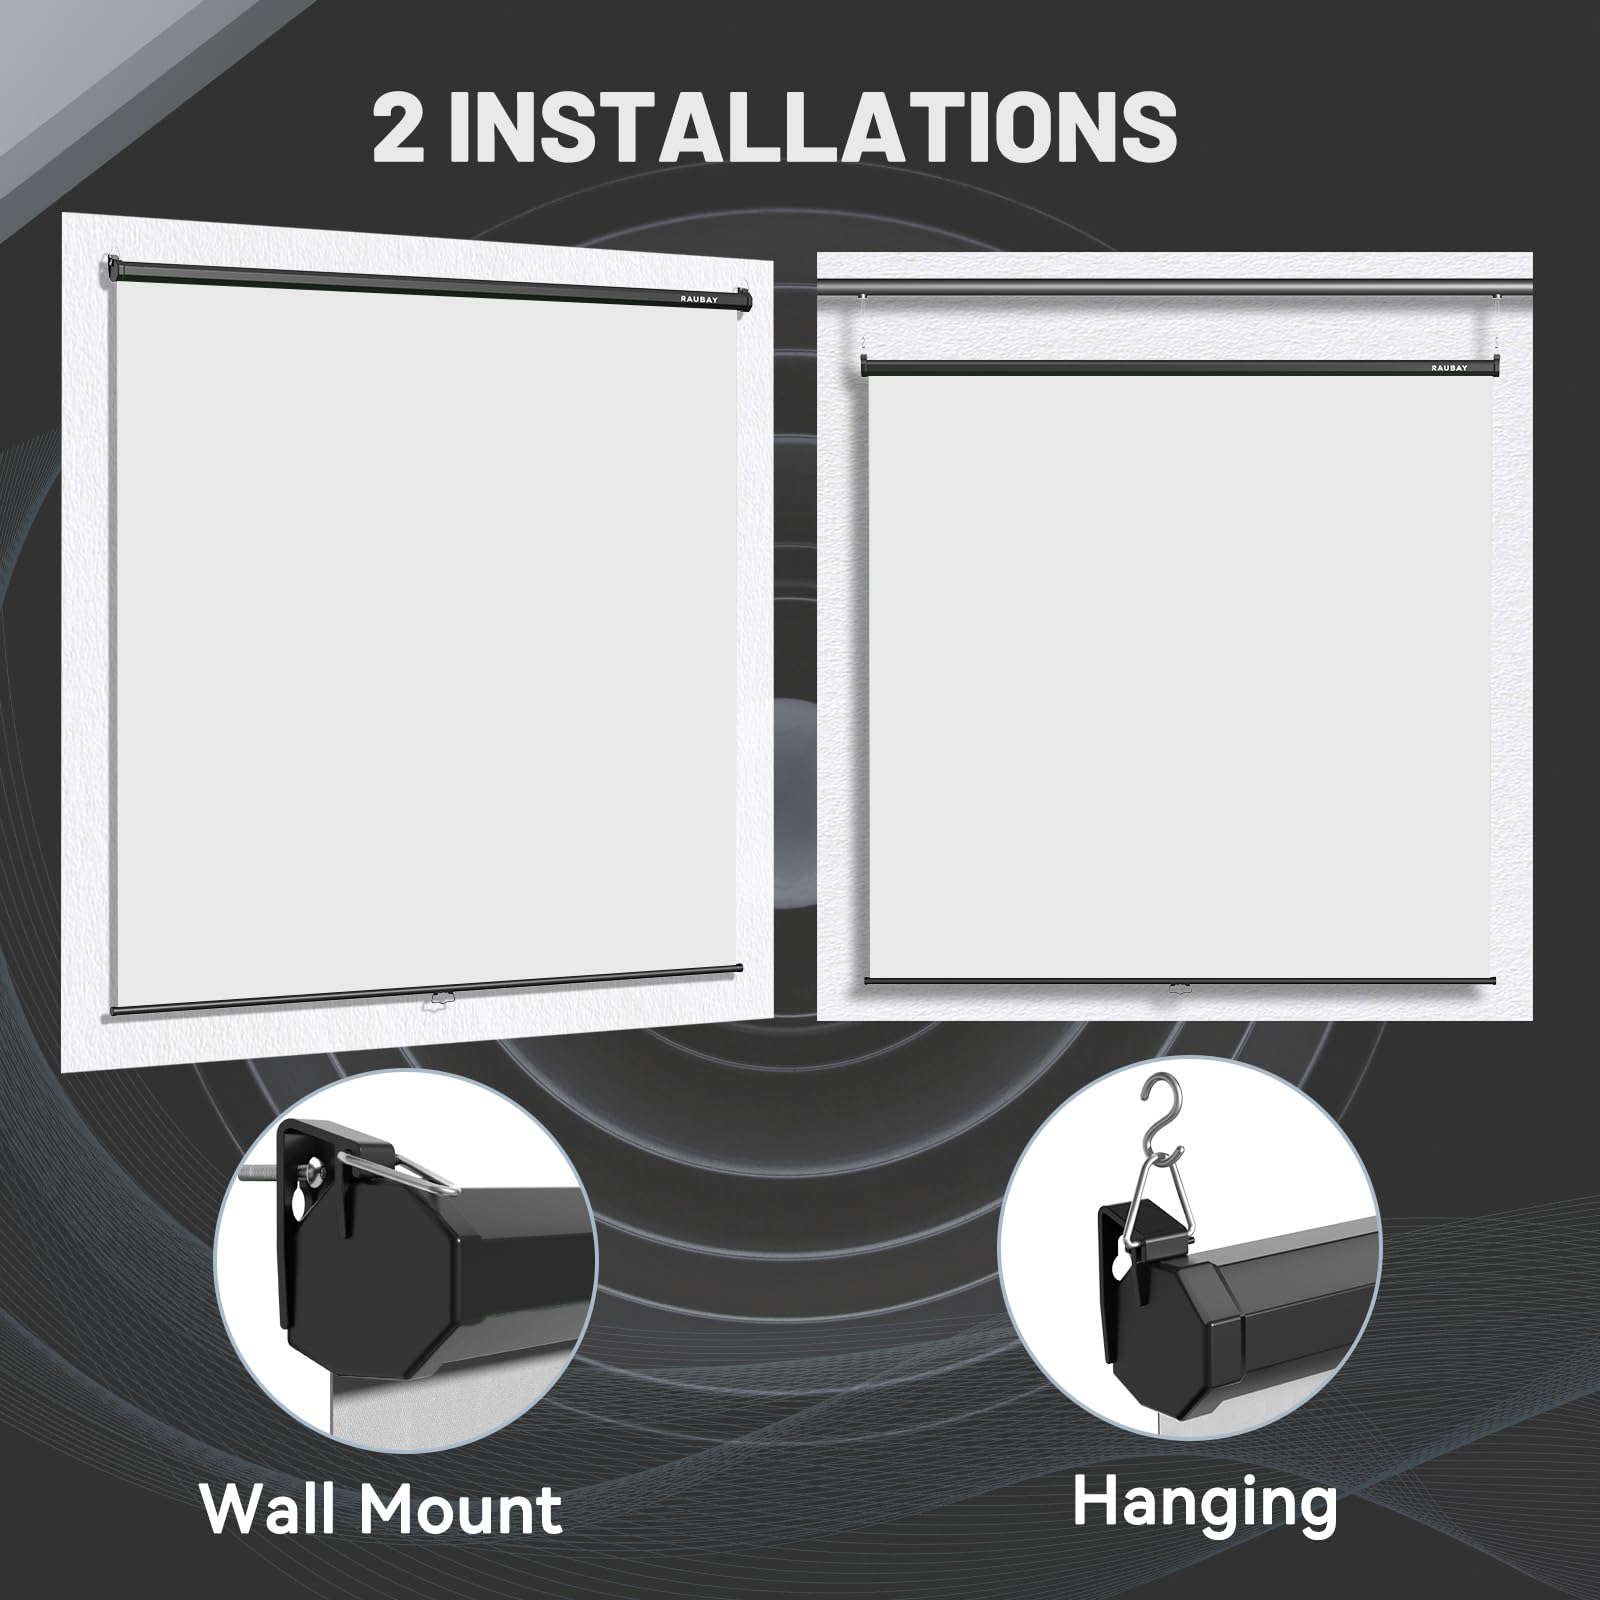 RAUBAY Retractable Pull Down White Screen Backdrop - 78.7"x 86.6" Collapsible Wall-Mount Background for Professional Video Production, Photography, TikTok and Video Conferencing